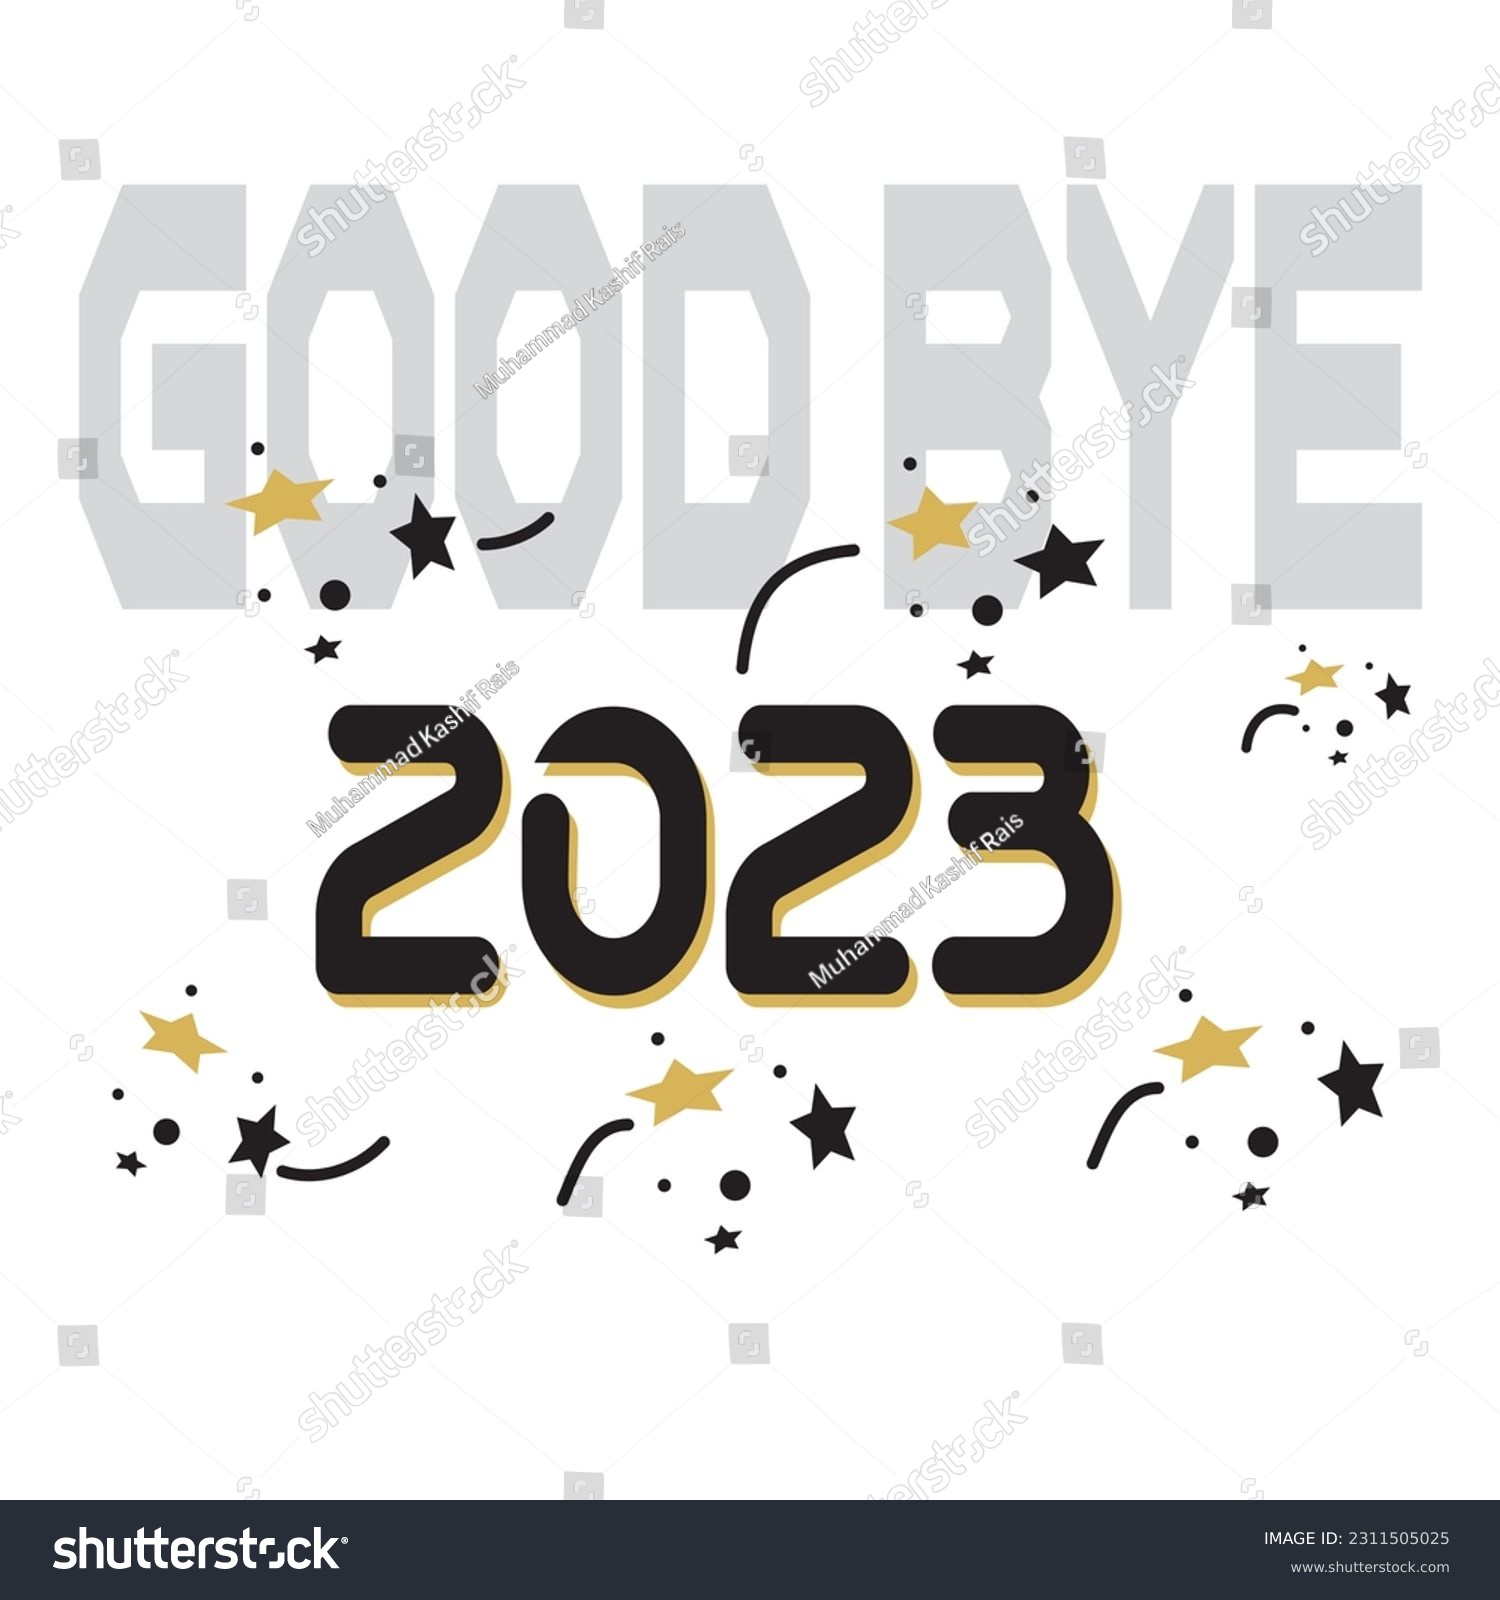 SVG of Goodbye 2023 - T shirt Design, Modern calligraphy, Cut Files for Cricut Svg, Illustration for prints on bags, posters. svg